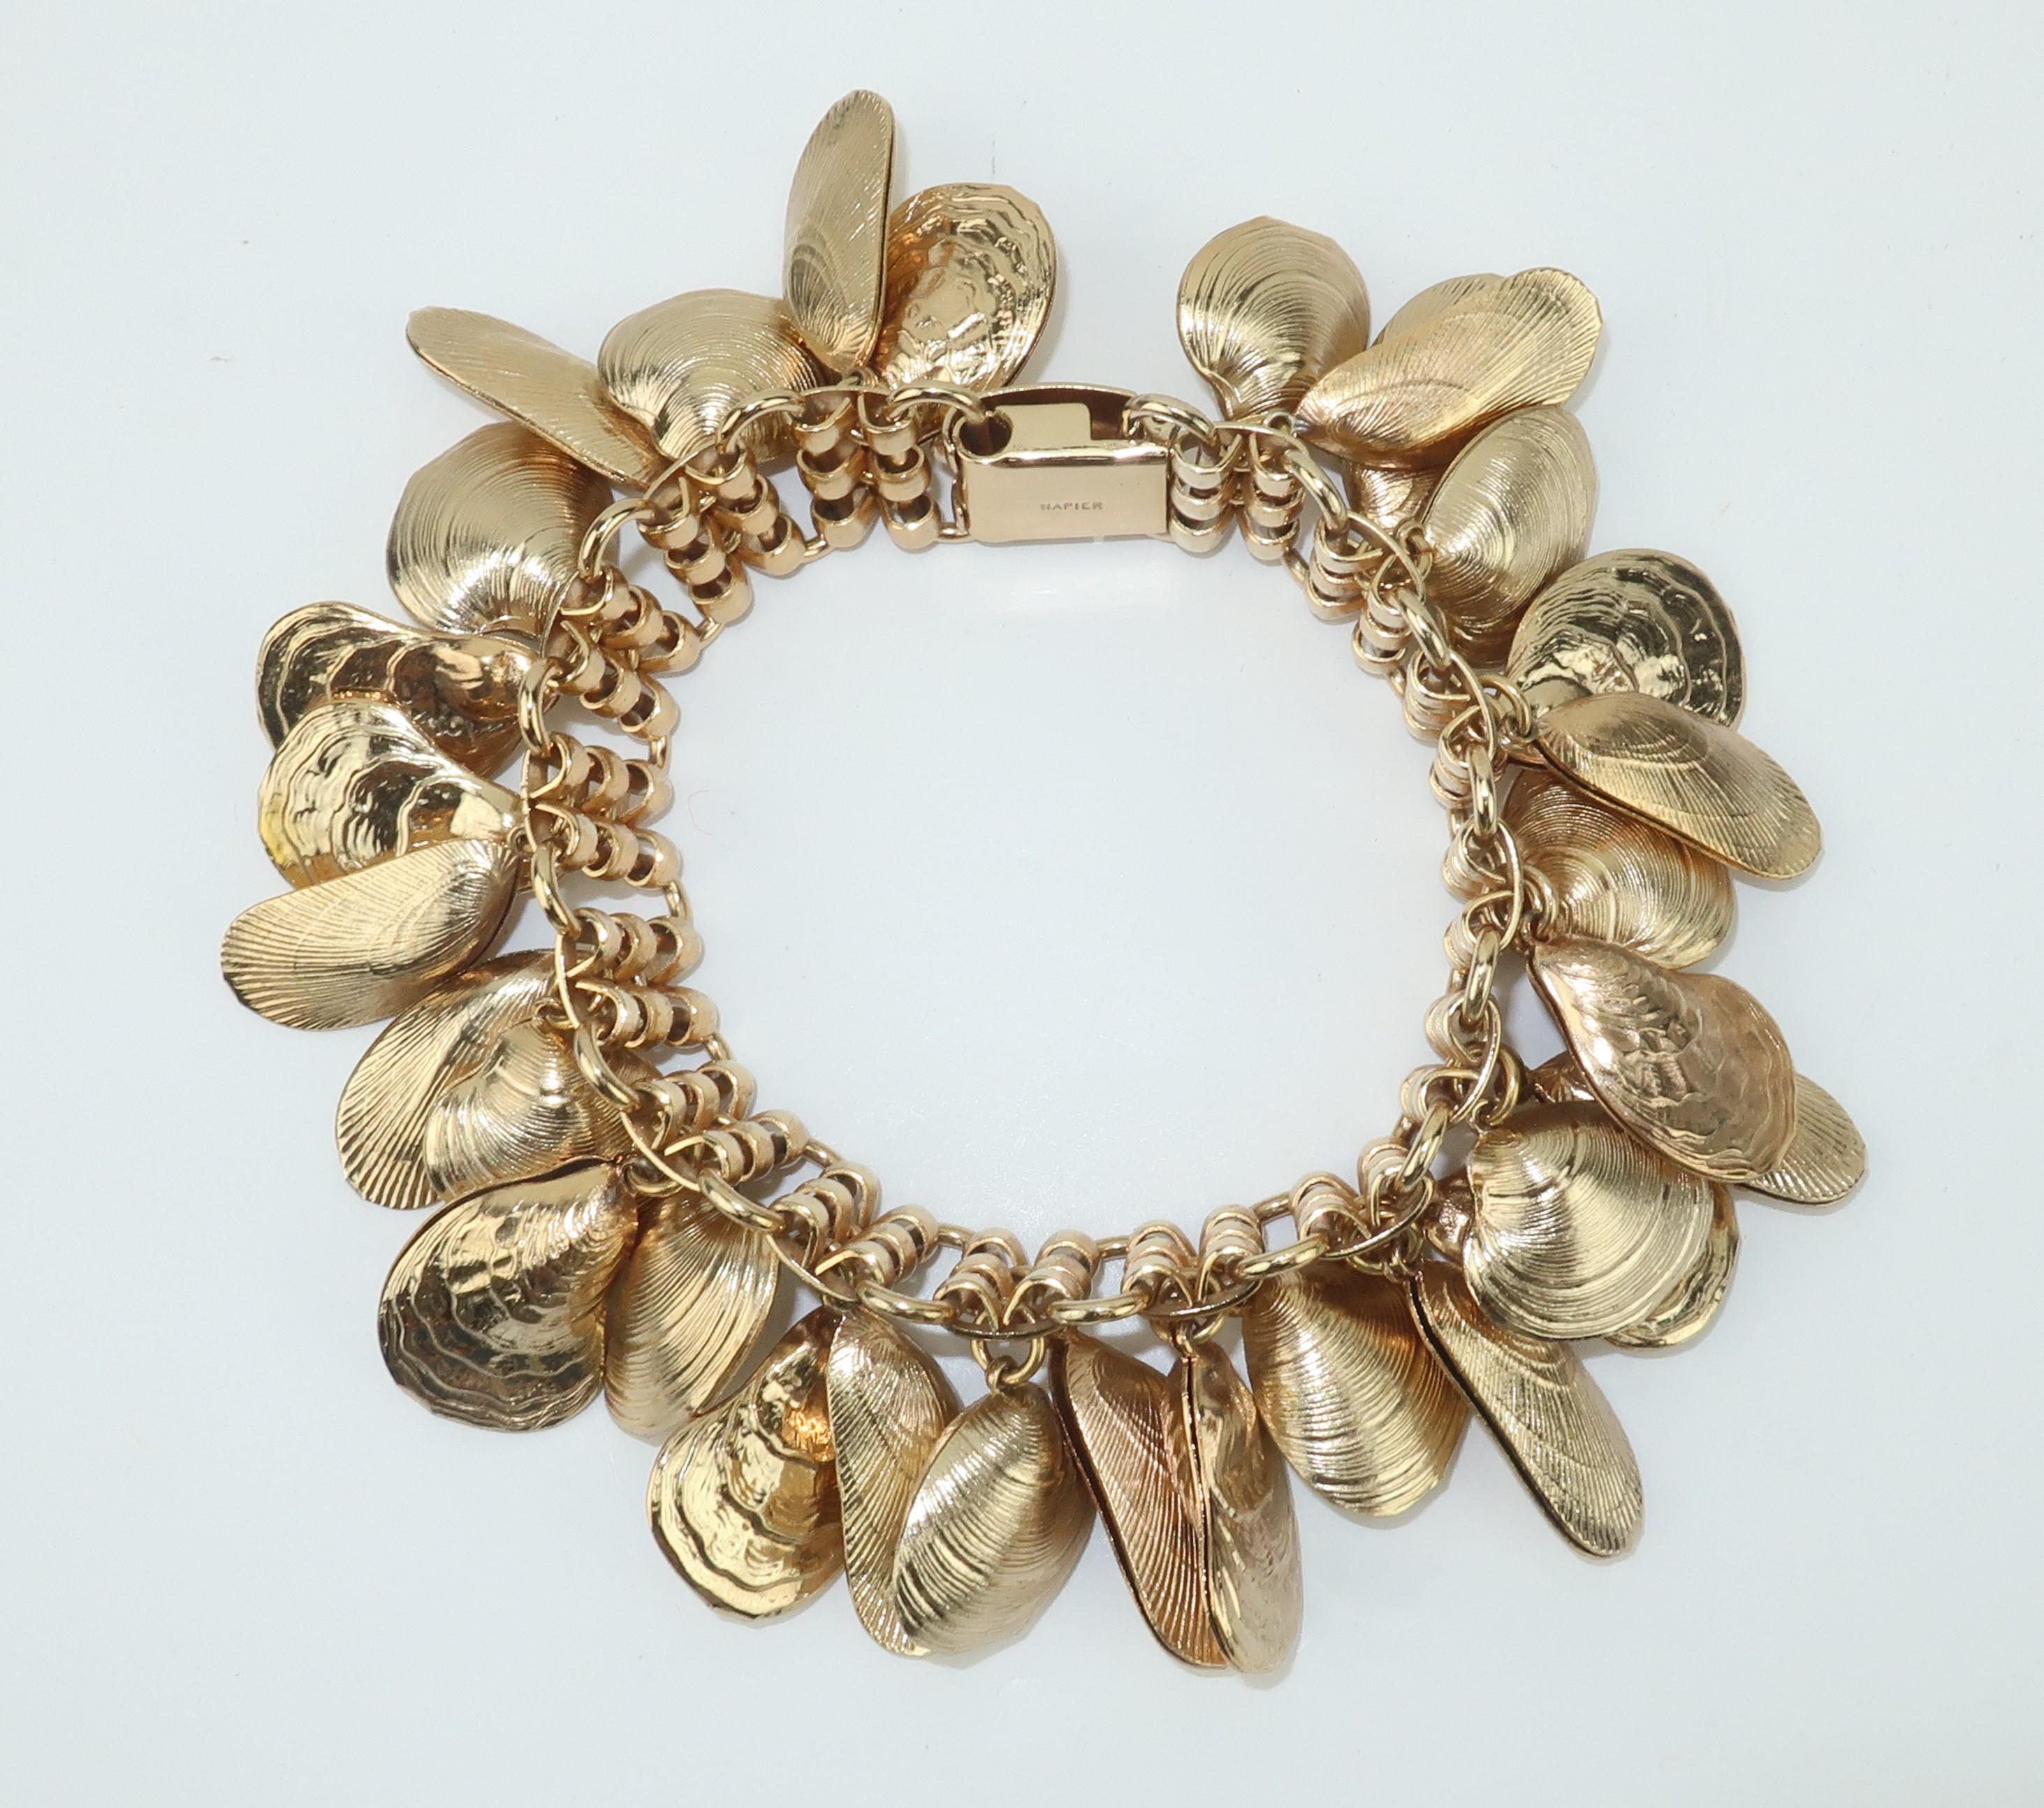 Let your 'charming' presence be known when wearing a 1960's Napier demi-parure of a charm bracelet and dangle earrings decorated with gold tone clam and oyster shells.  The bracelet has a box closure and the earrings sport clip on hardware.  All